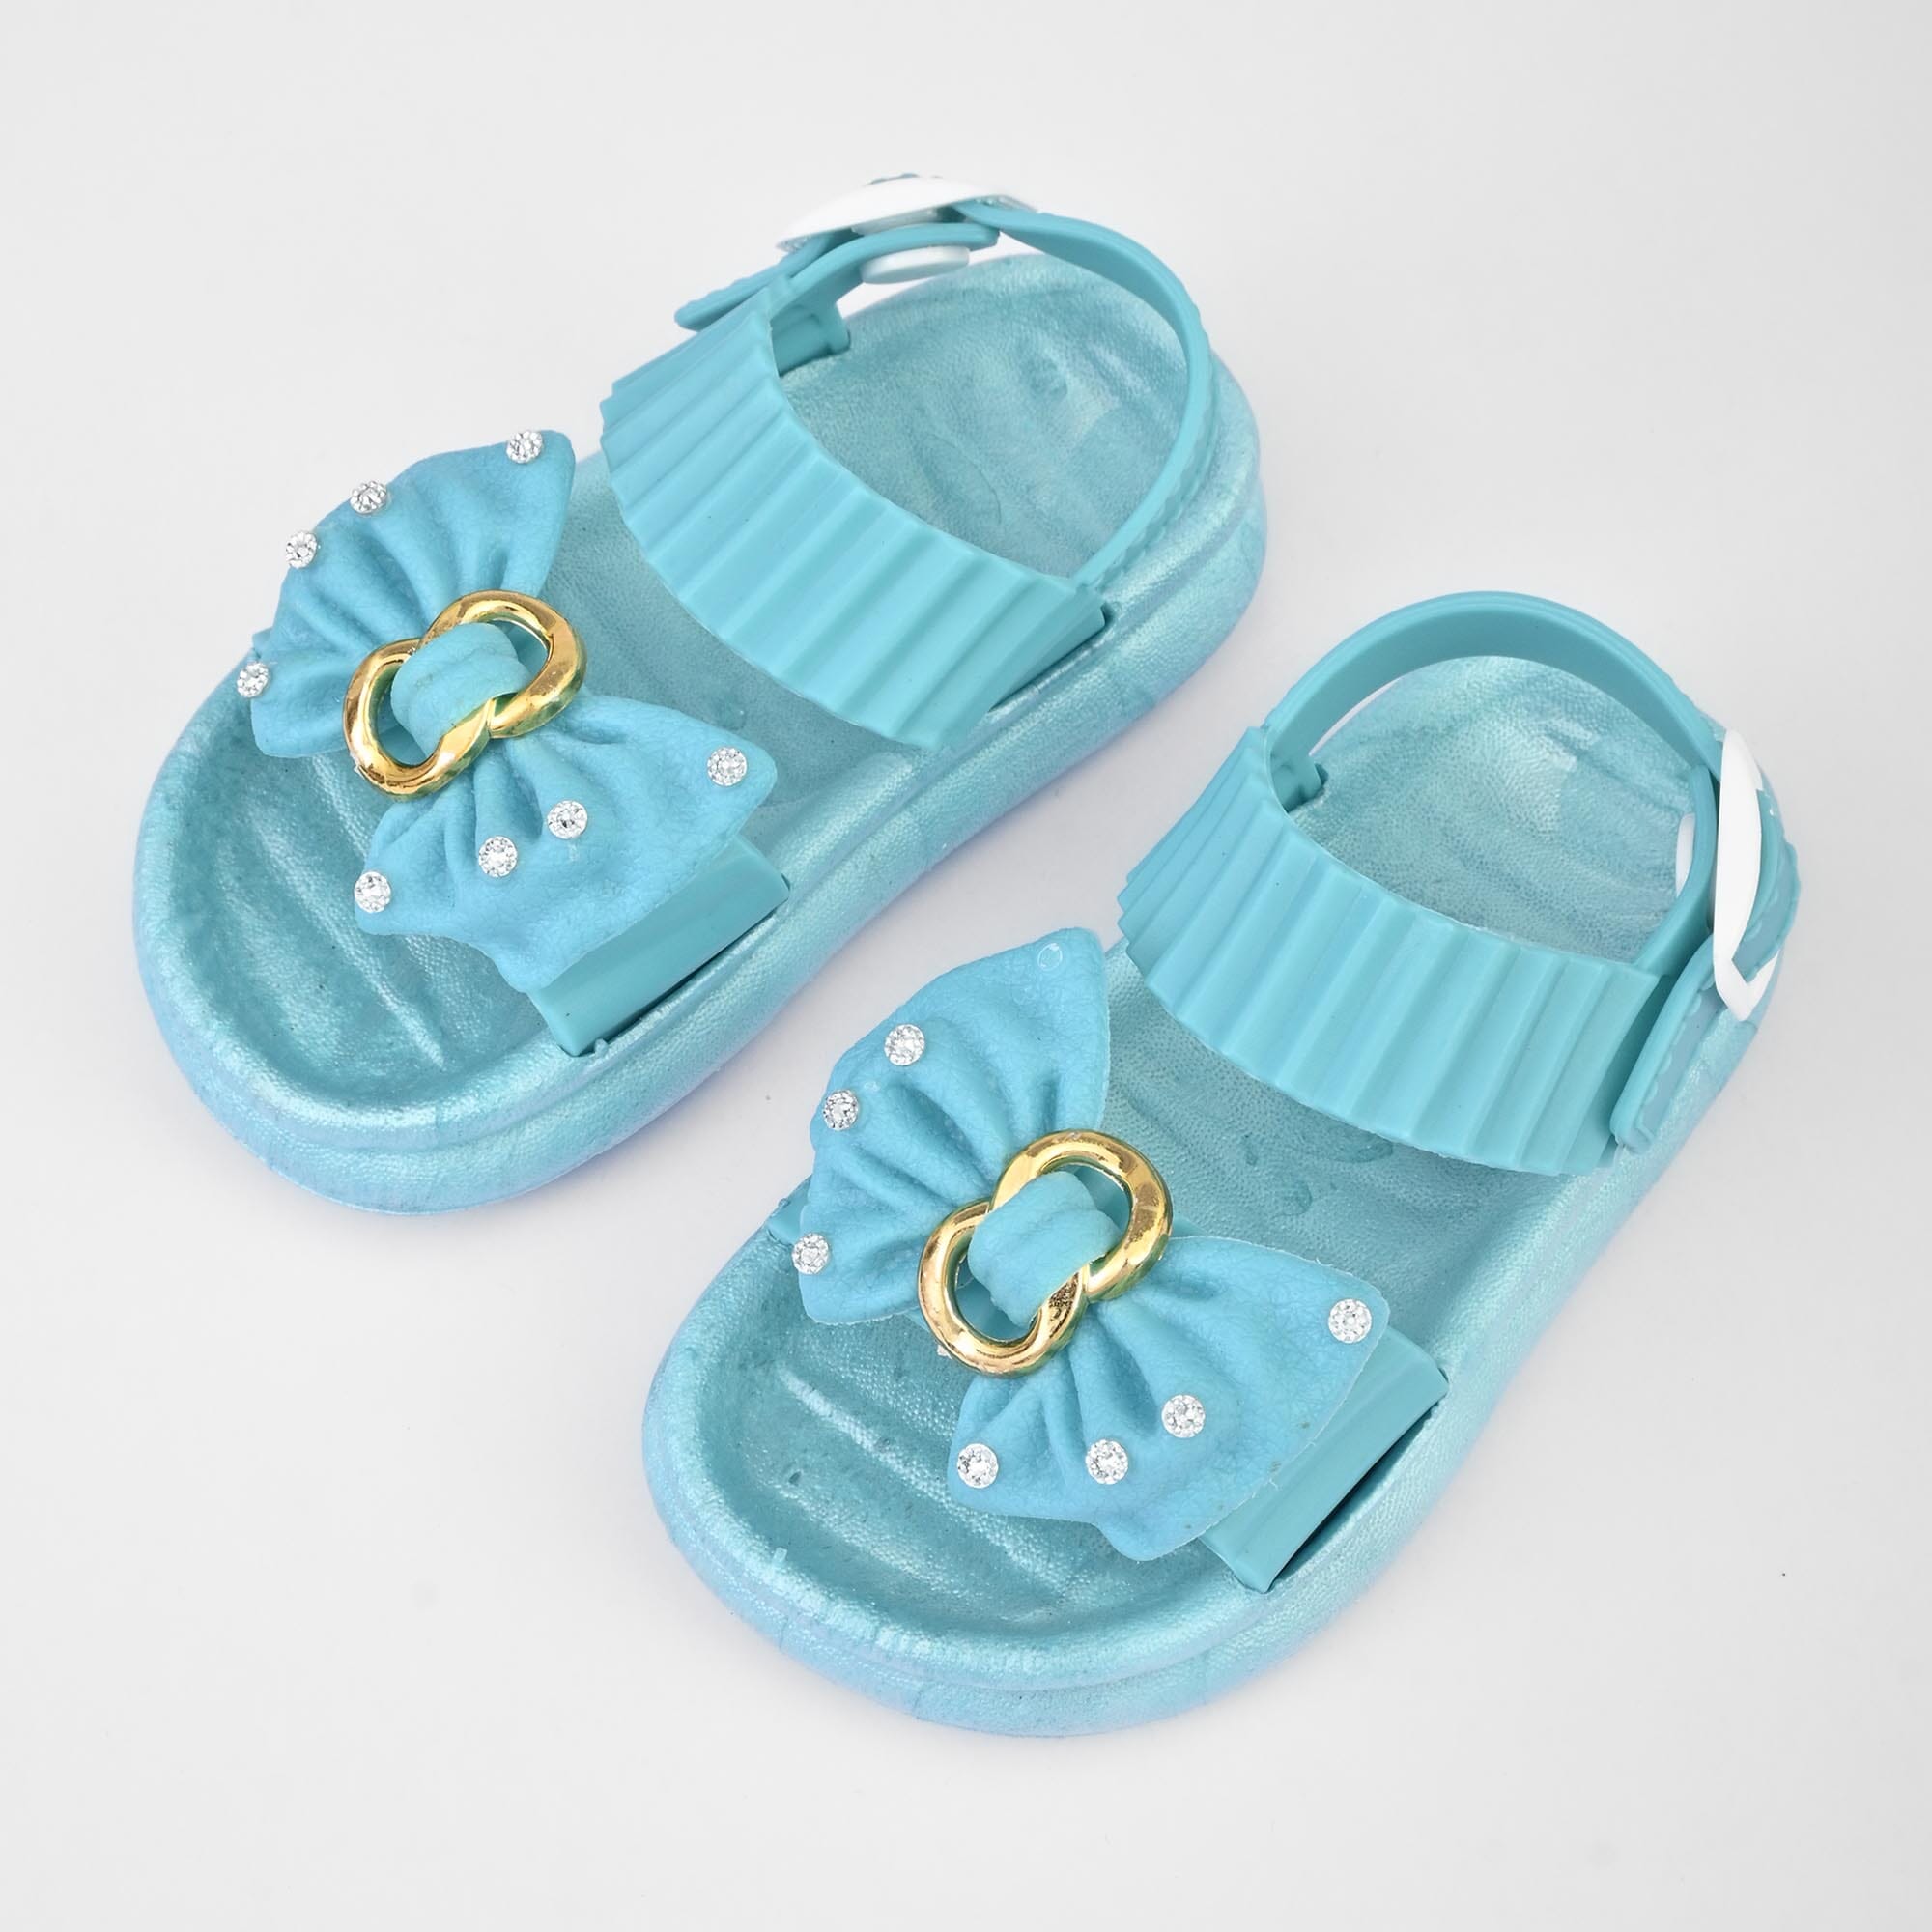 Summer Cool PU Leather Flower Design Skidproof Sandals Shoes for Baby